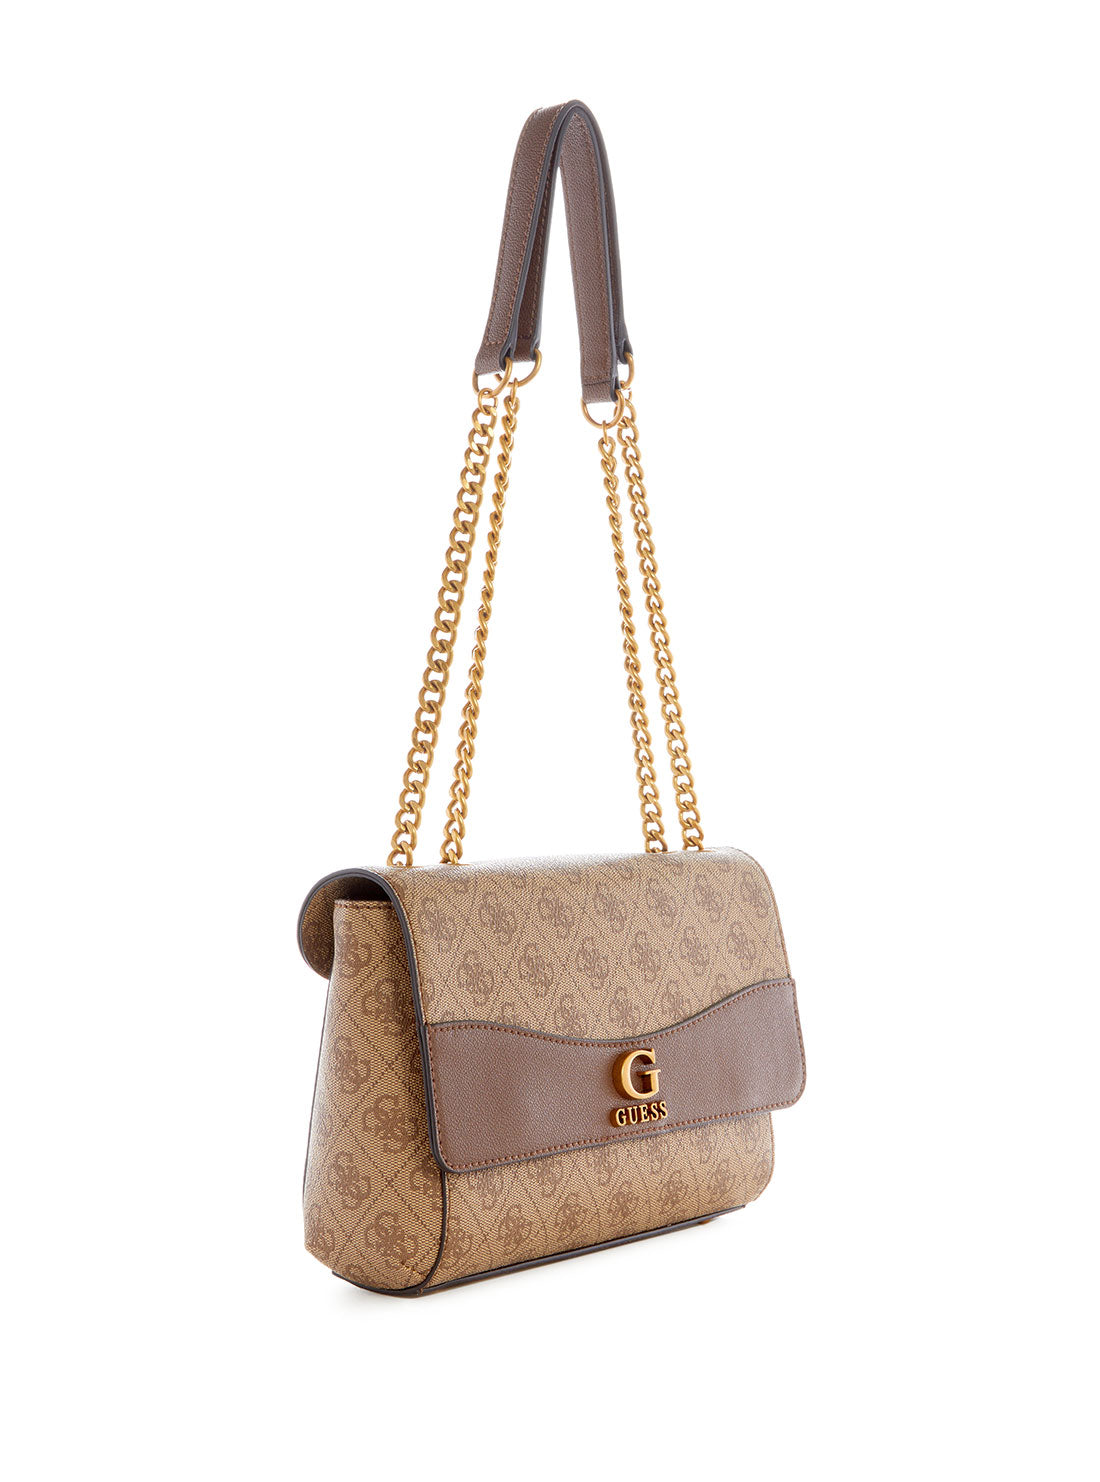 GUESS Women's Brown Logo Nell Crossbody Bag SB873521 Front Side View